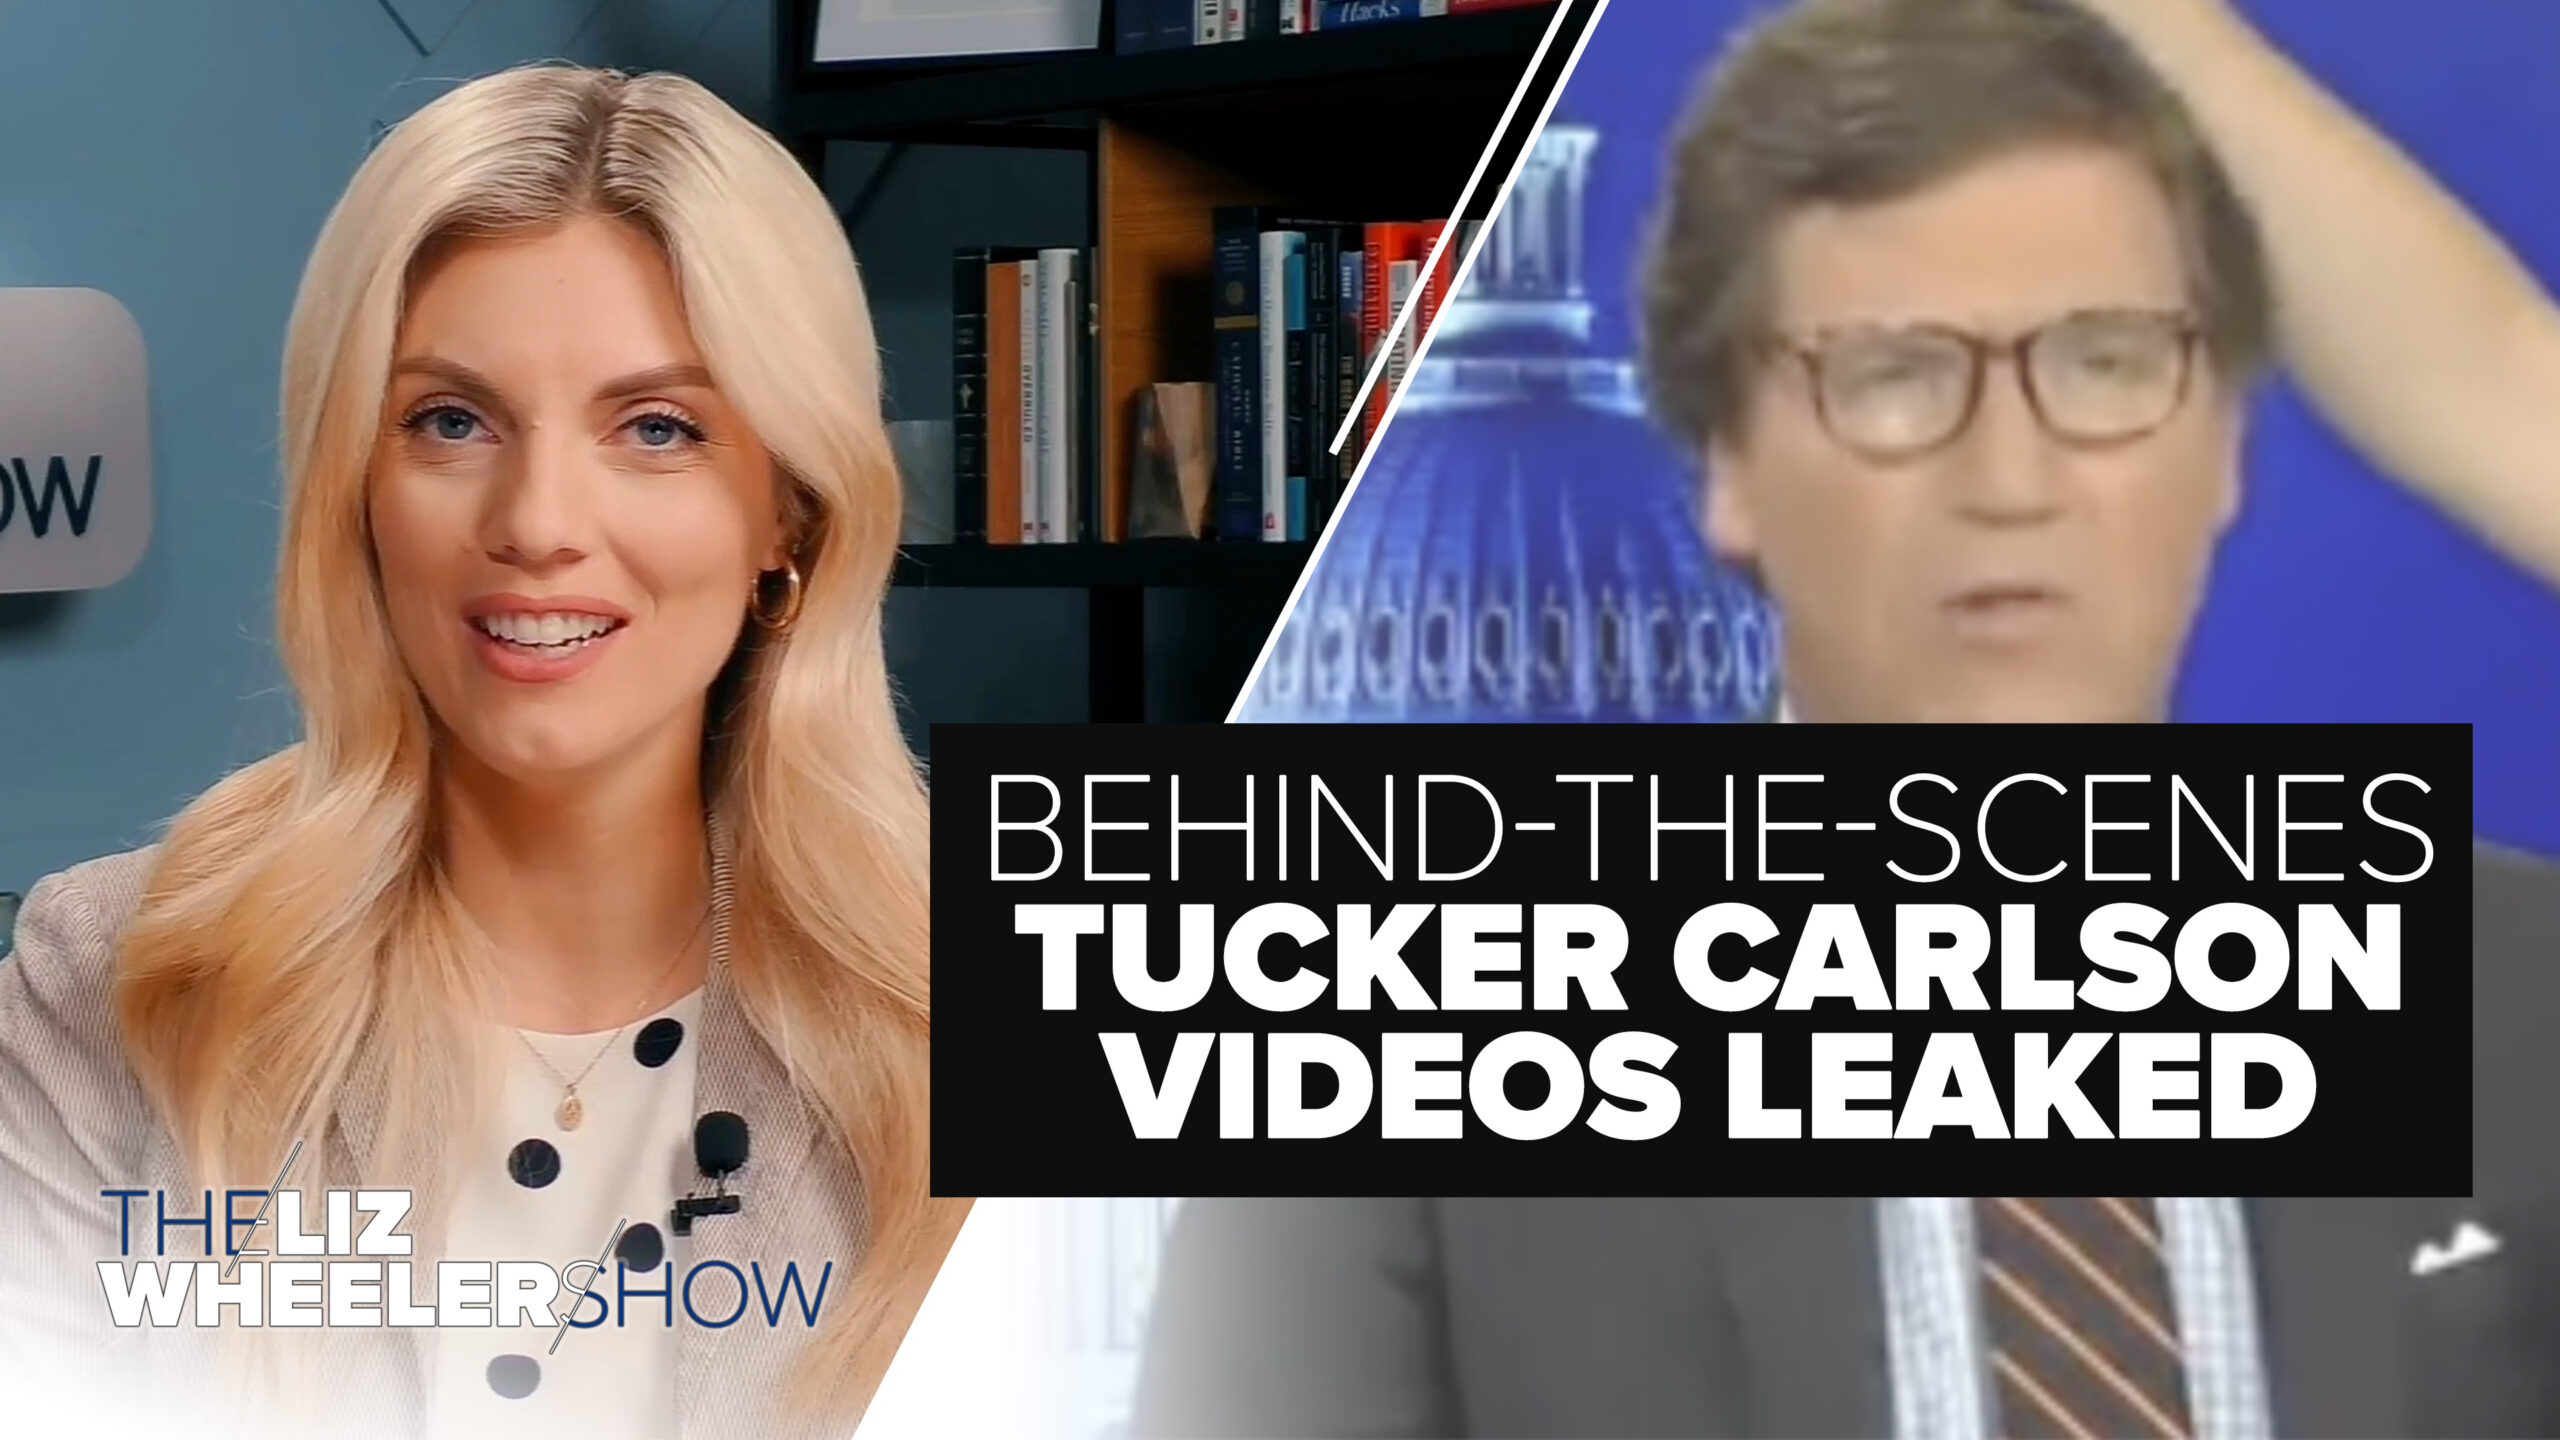 Tucker Carlson appears on his former show with Fox News